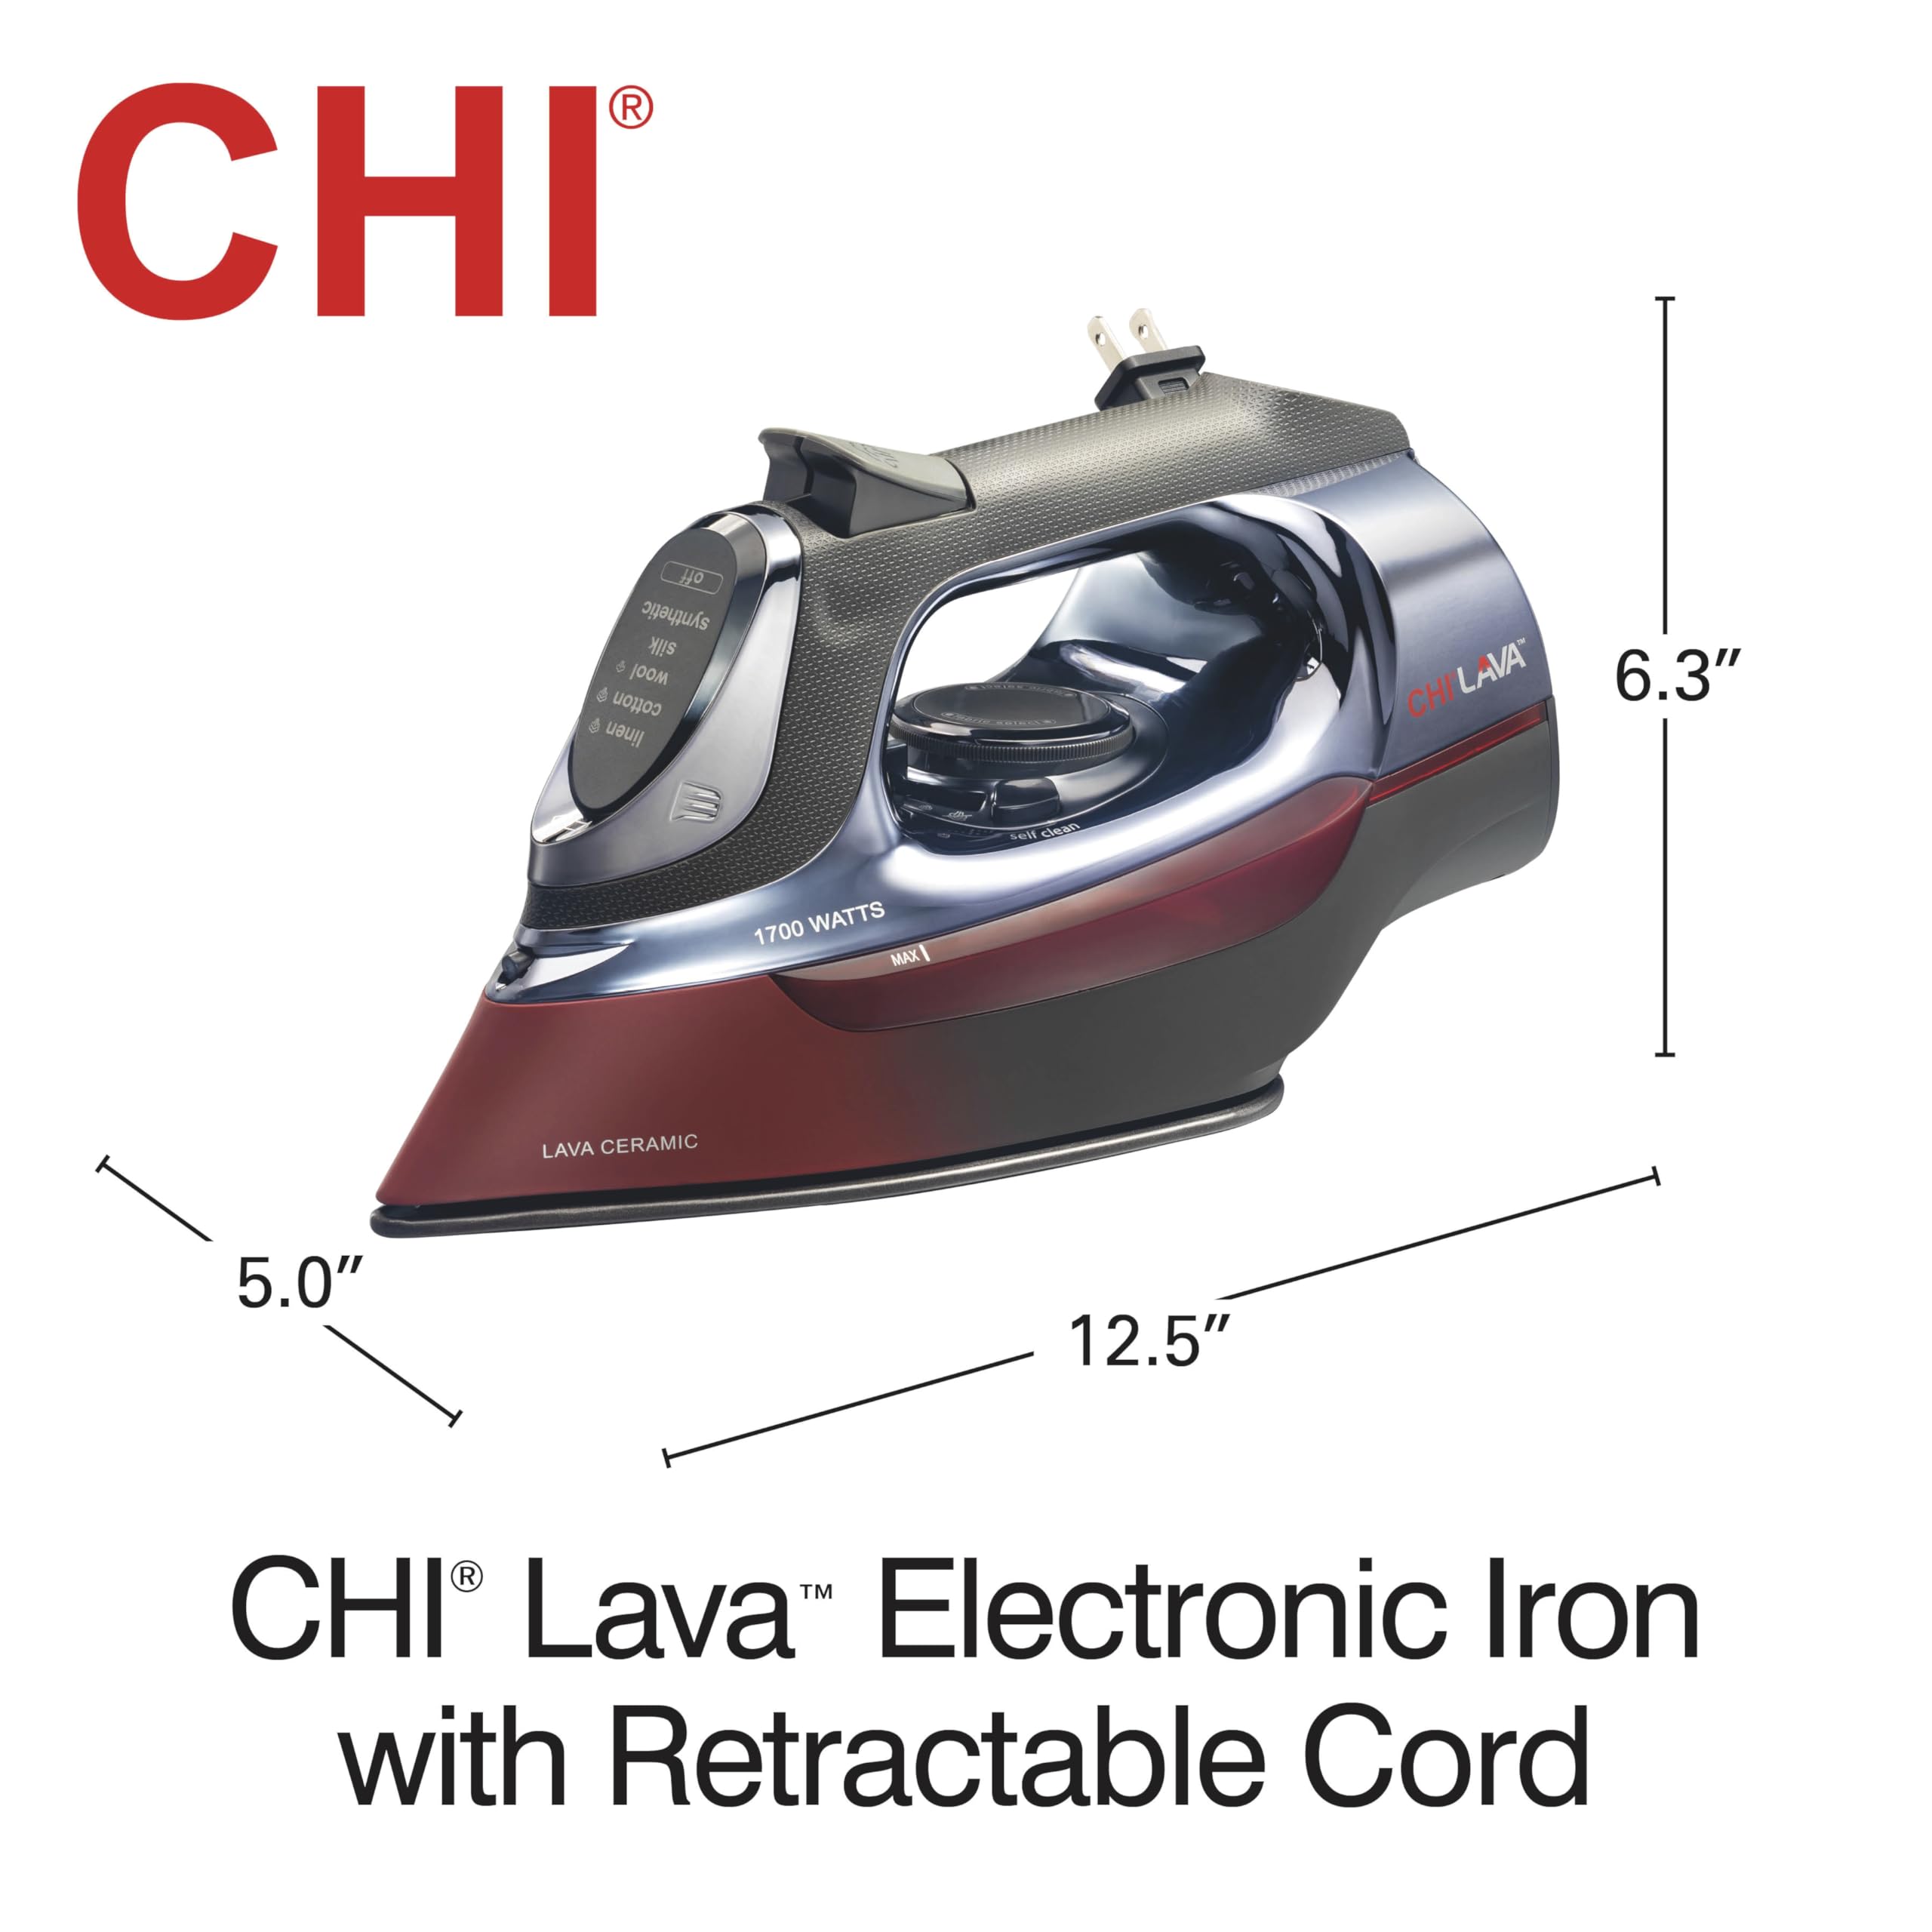 CHI Steam Iron for Clothes with 8’ Retractable Cord, 1700 Watts, 3-Way Auto Shutoff, 400+ Holes, Professional Grade, Temperature Control Dial, Lava Infused Ceramic Soleplate, Black (13113)